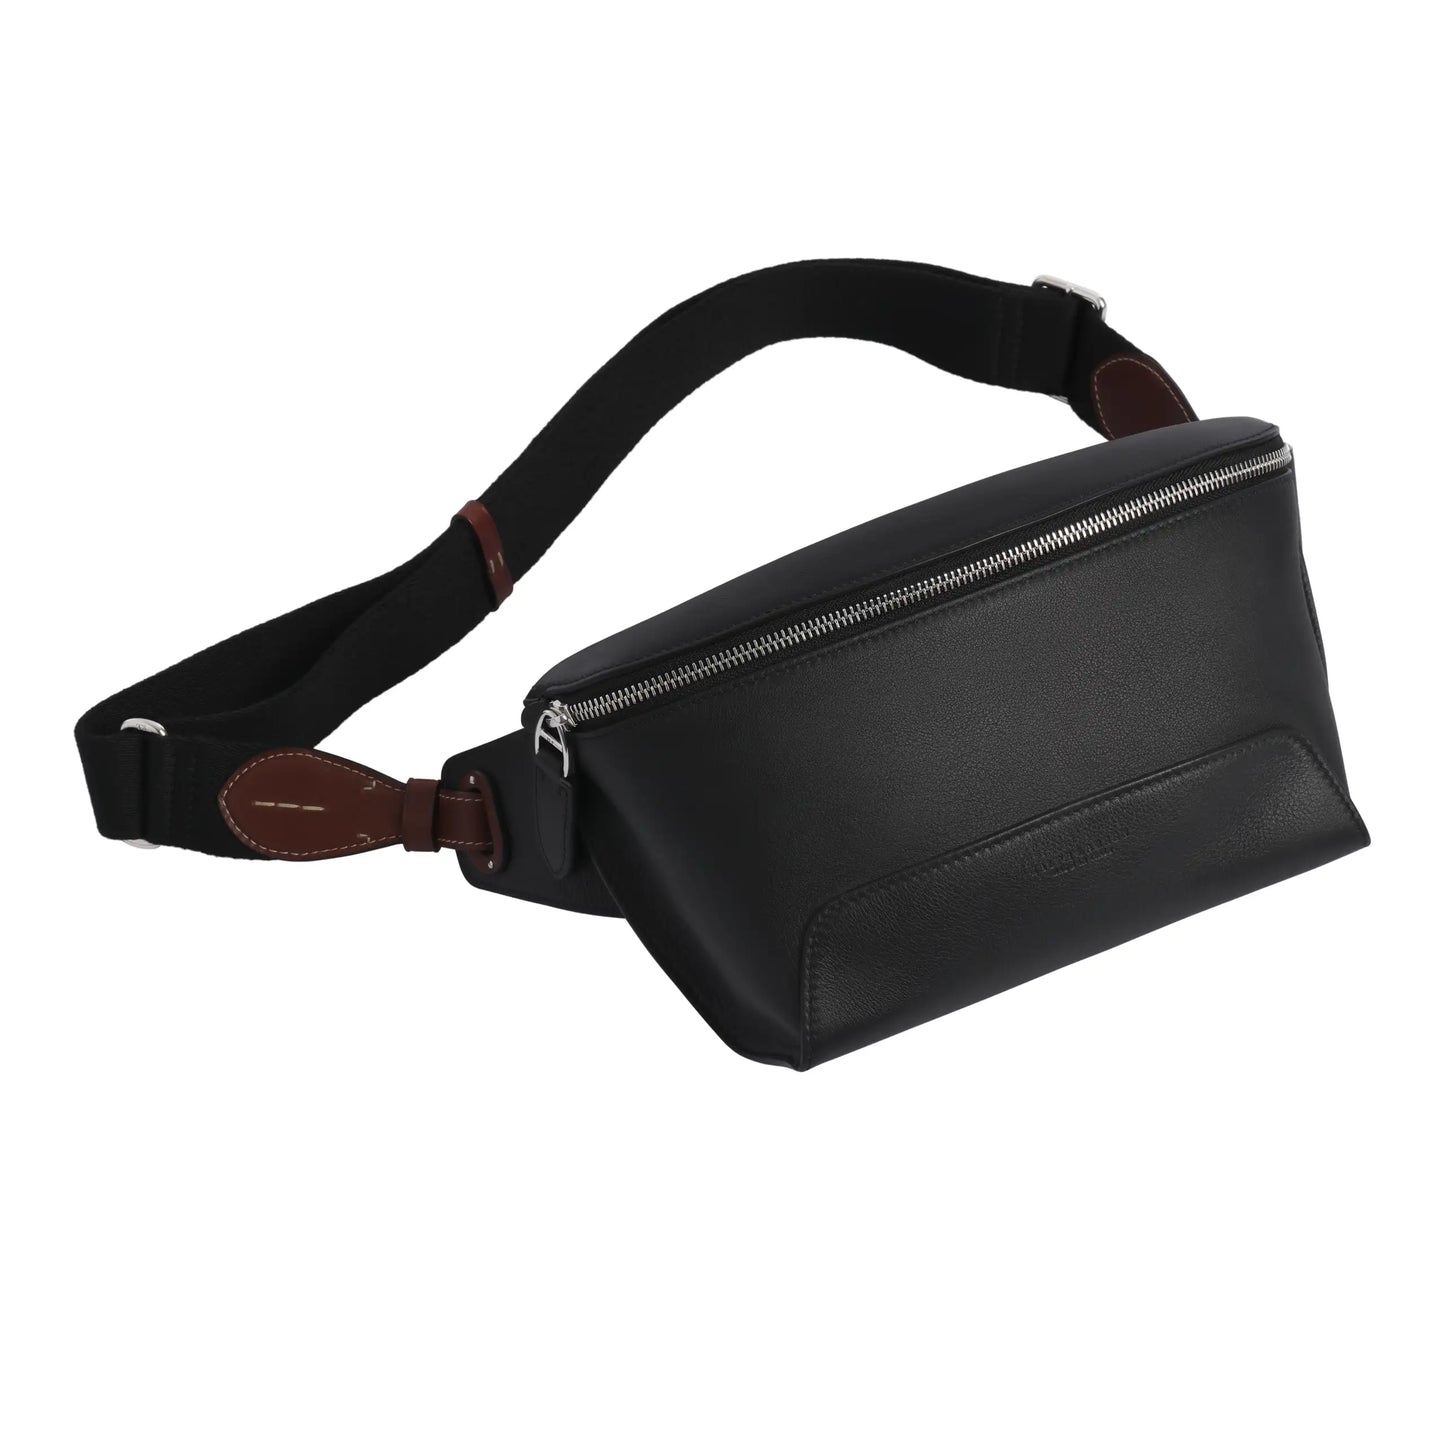 Smooth Calf Leather Waist Bag in Black